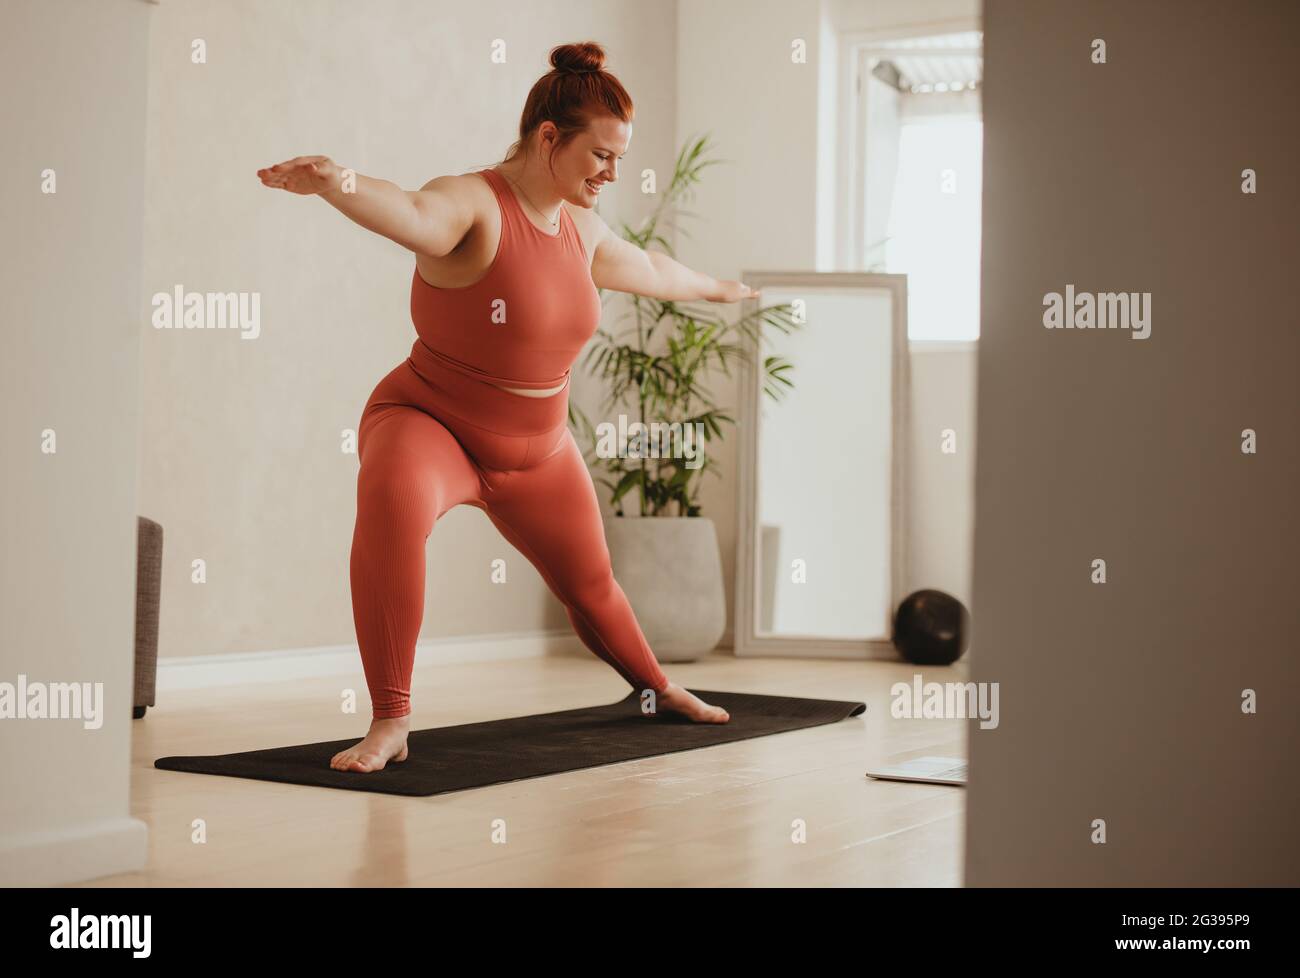 Fit woman exercising at home on fitness mat. Woman in sportswear doing yoga workout at fitness studio. Stock Photo